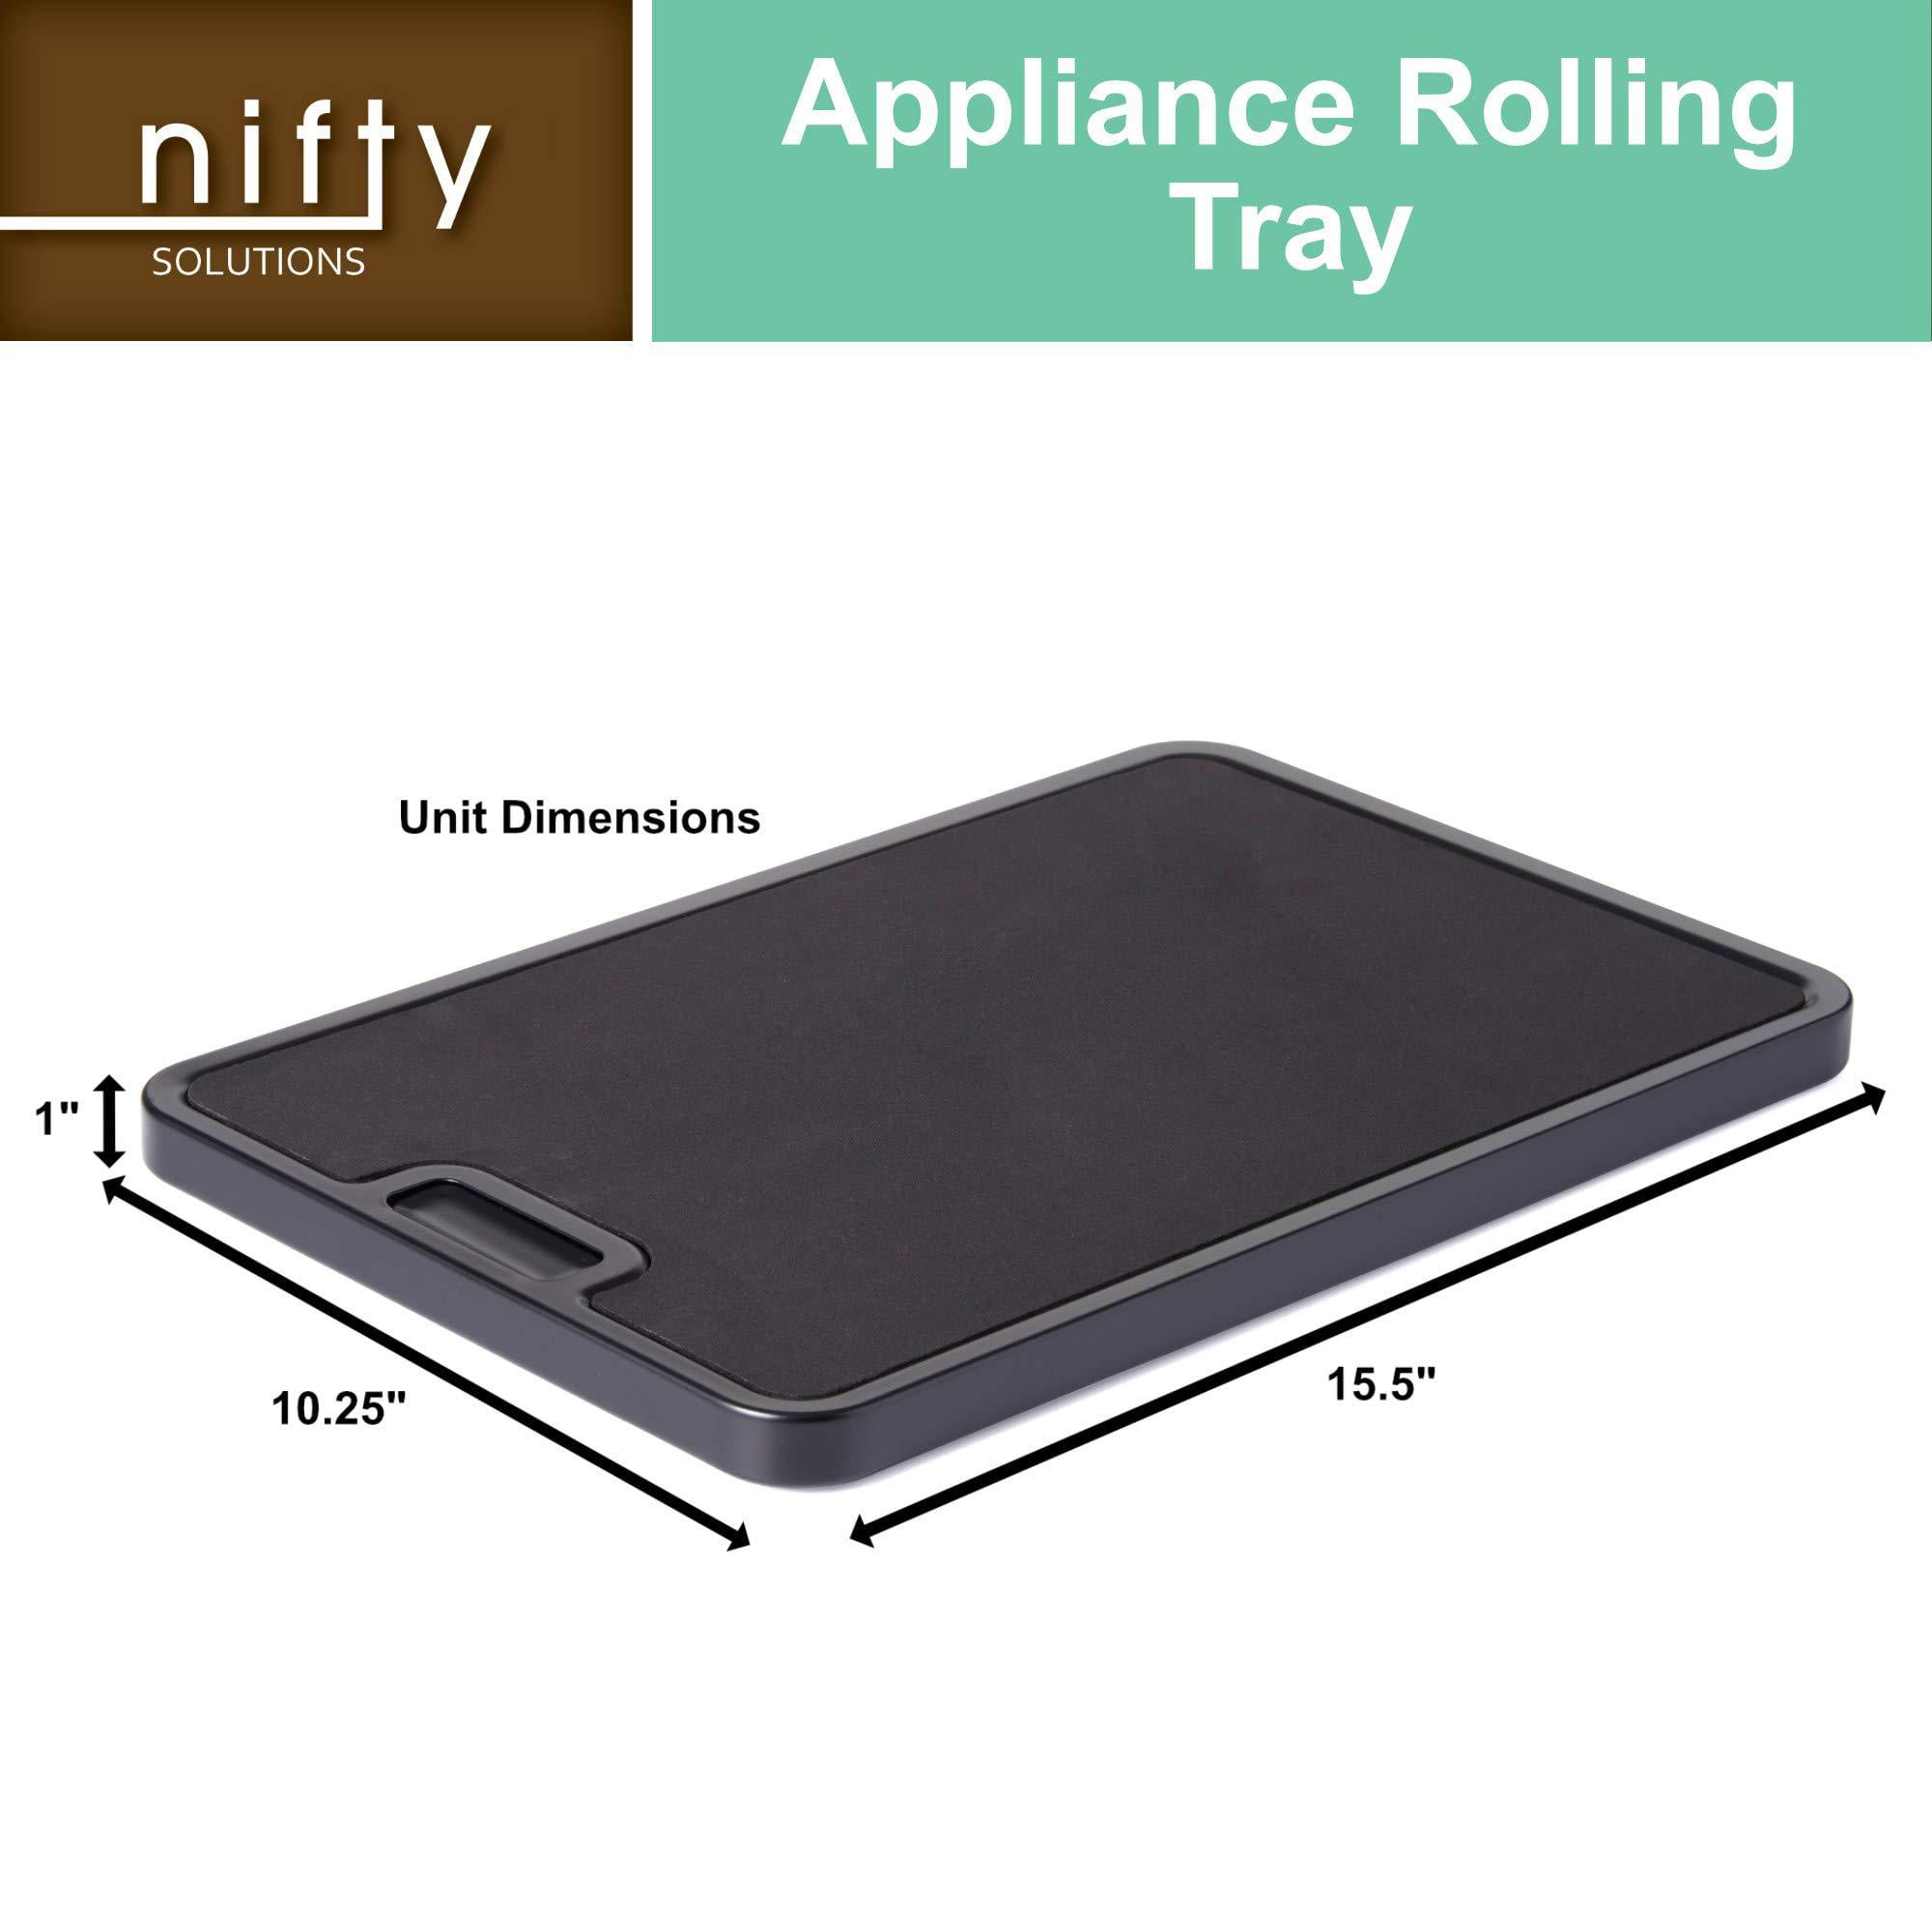 Nifty Large Appliance Rolling Tray, Black – Kitchen Caddy Sliding Tray,  Integrated Rolling System, Non-Slip Pad Top, Sliding Tray for Coffee Maker